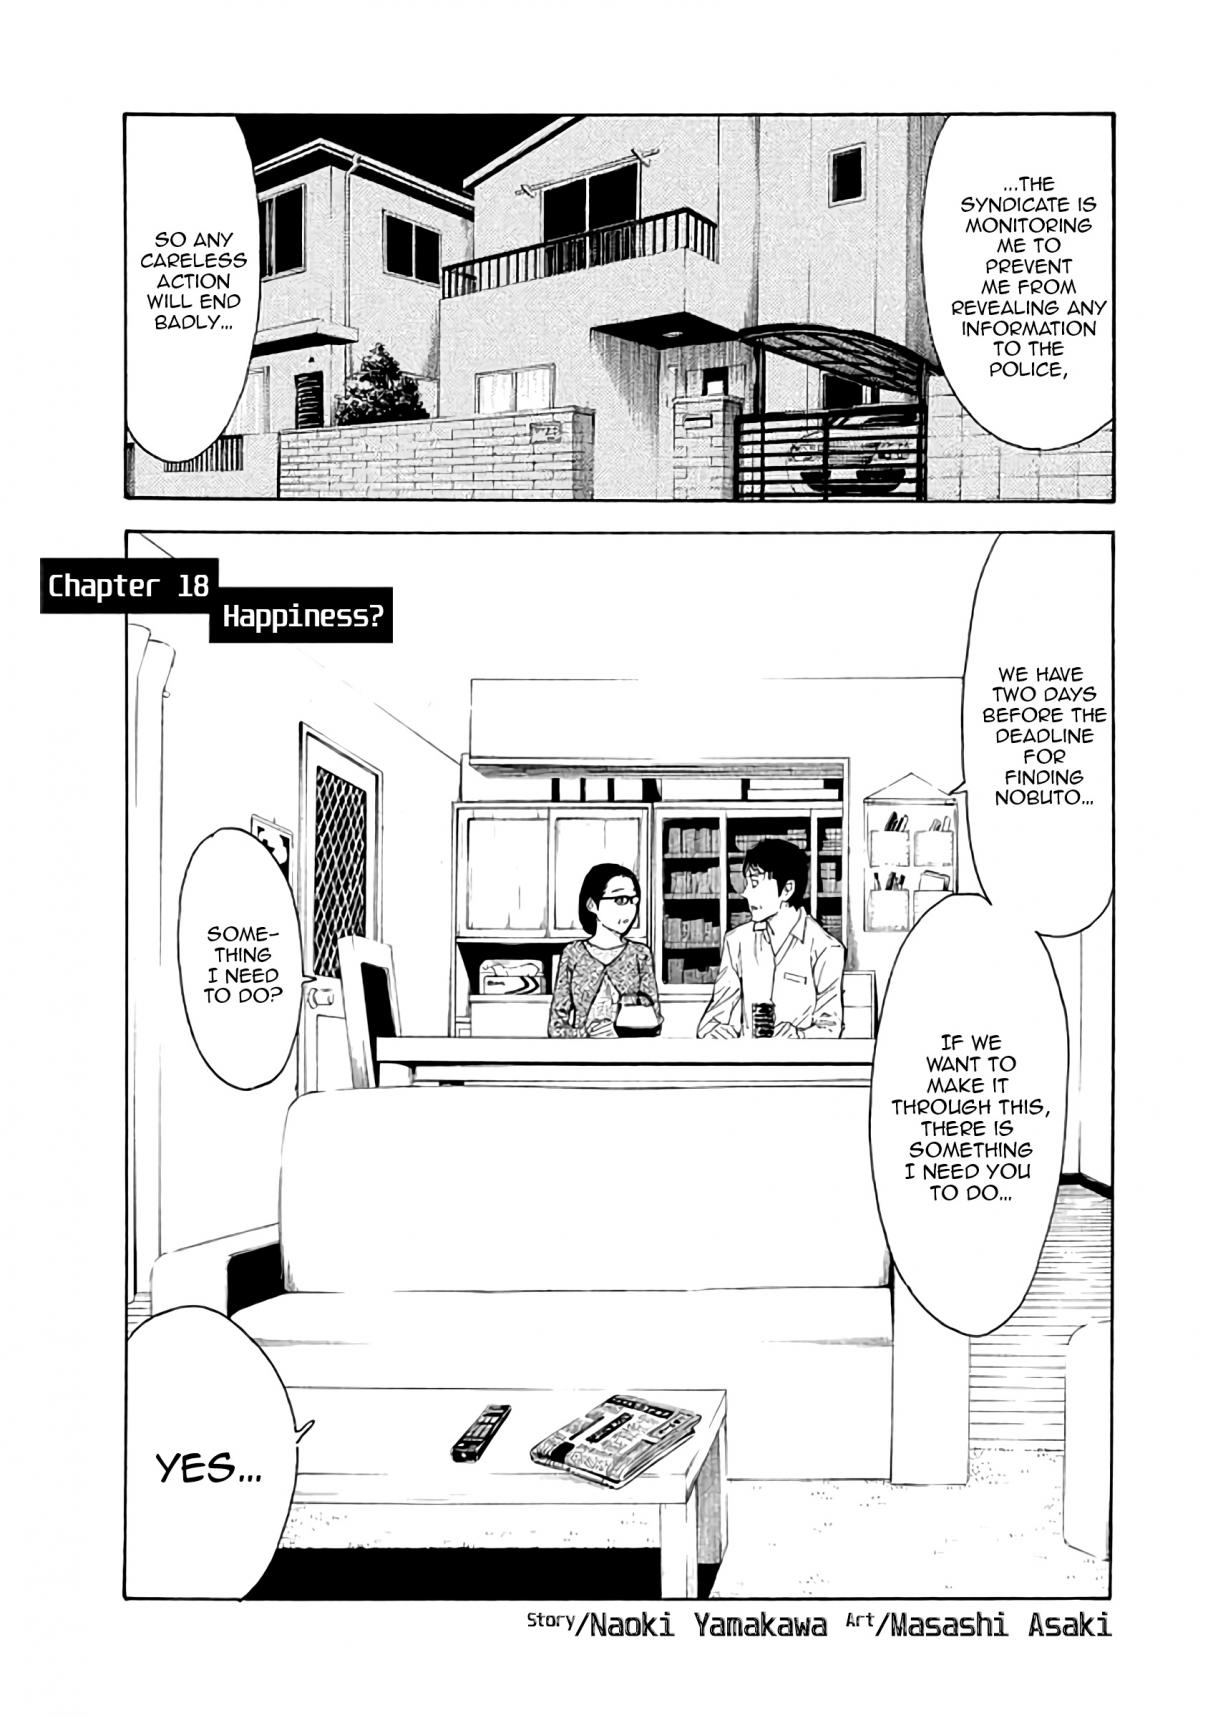 My Home Hero Vol. 3 Ch. 18 Happiness?